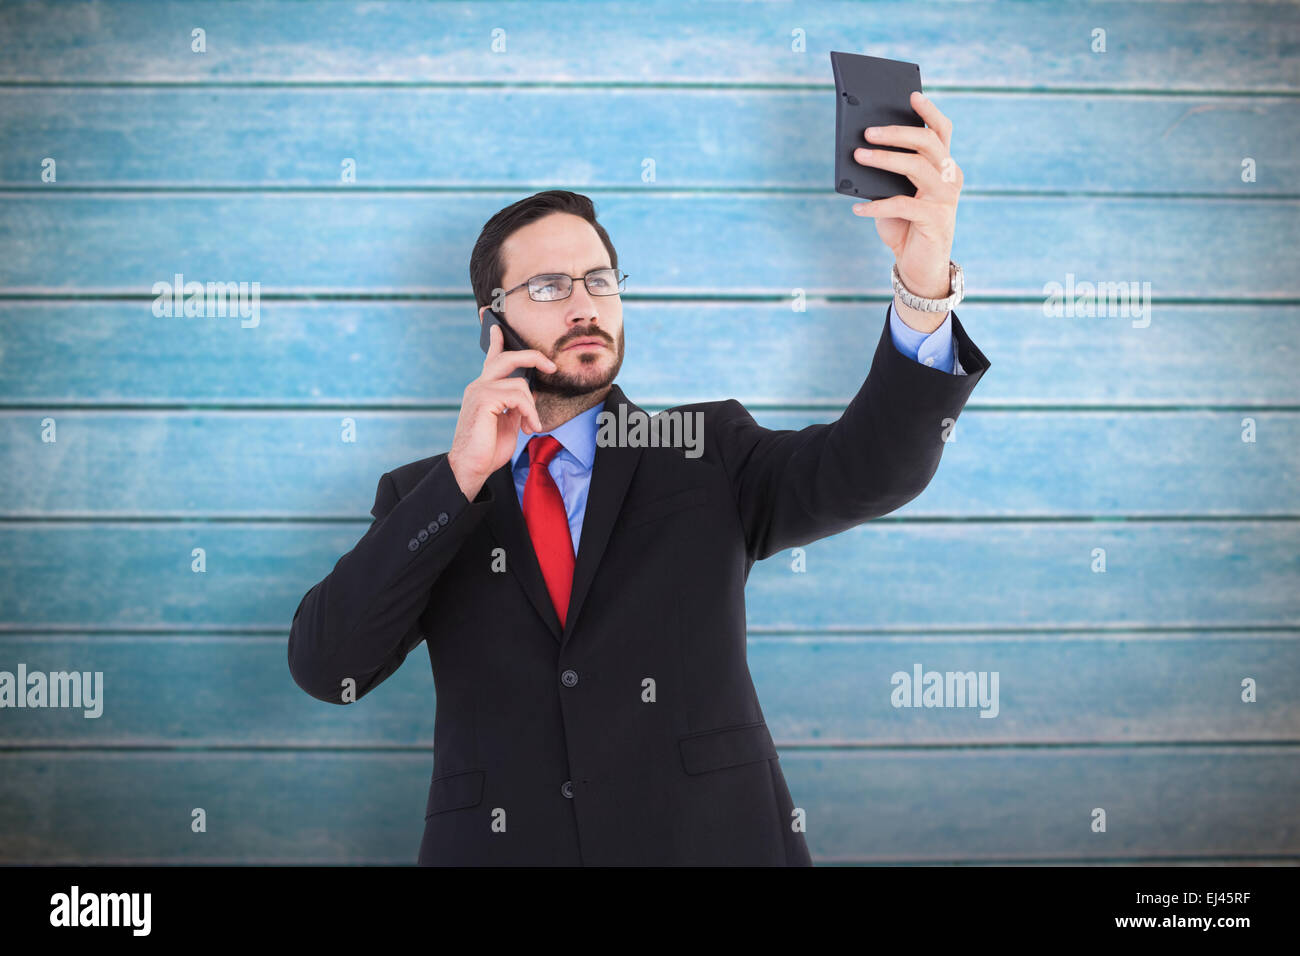 Composite image of businessman holding calculator while talking on phone Stock Photo